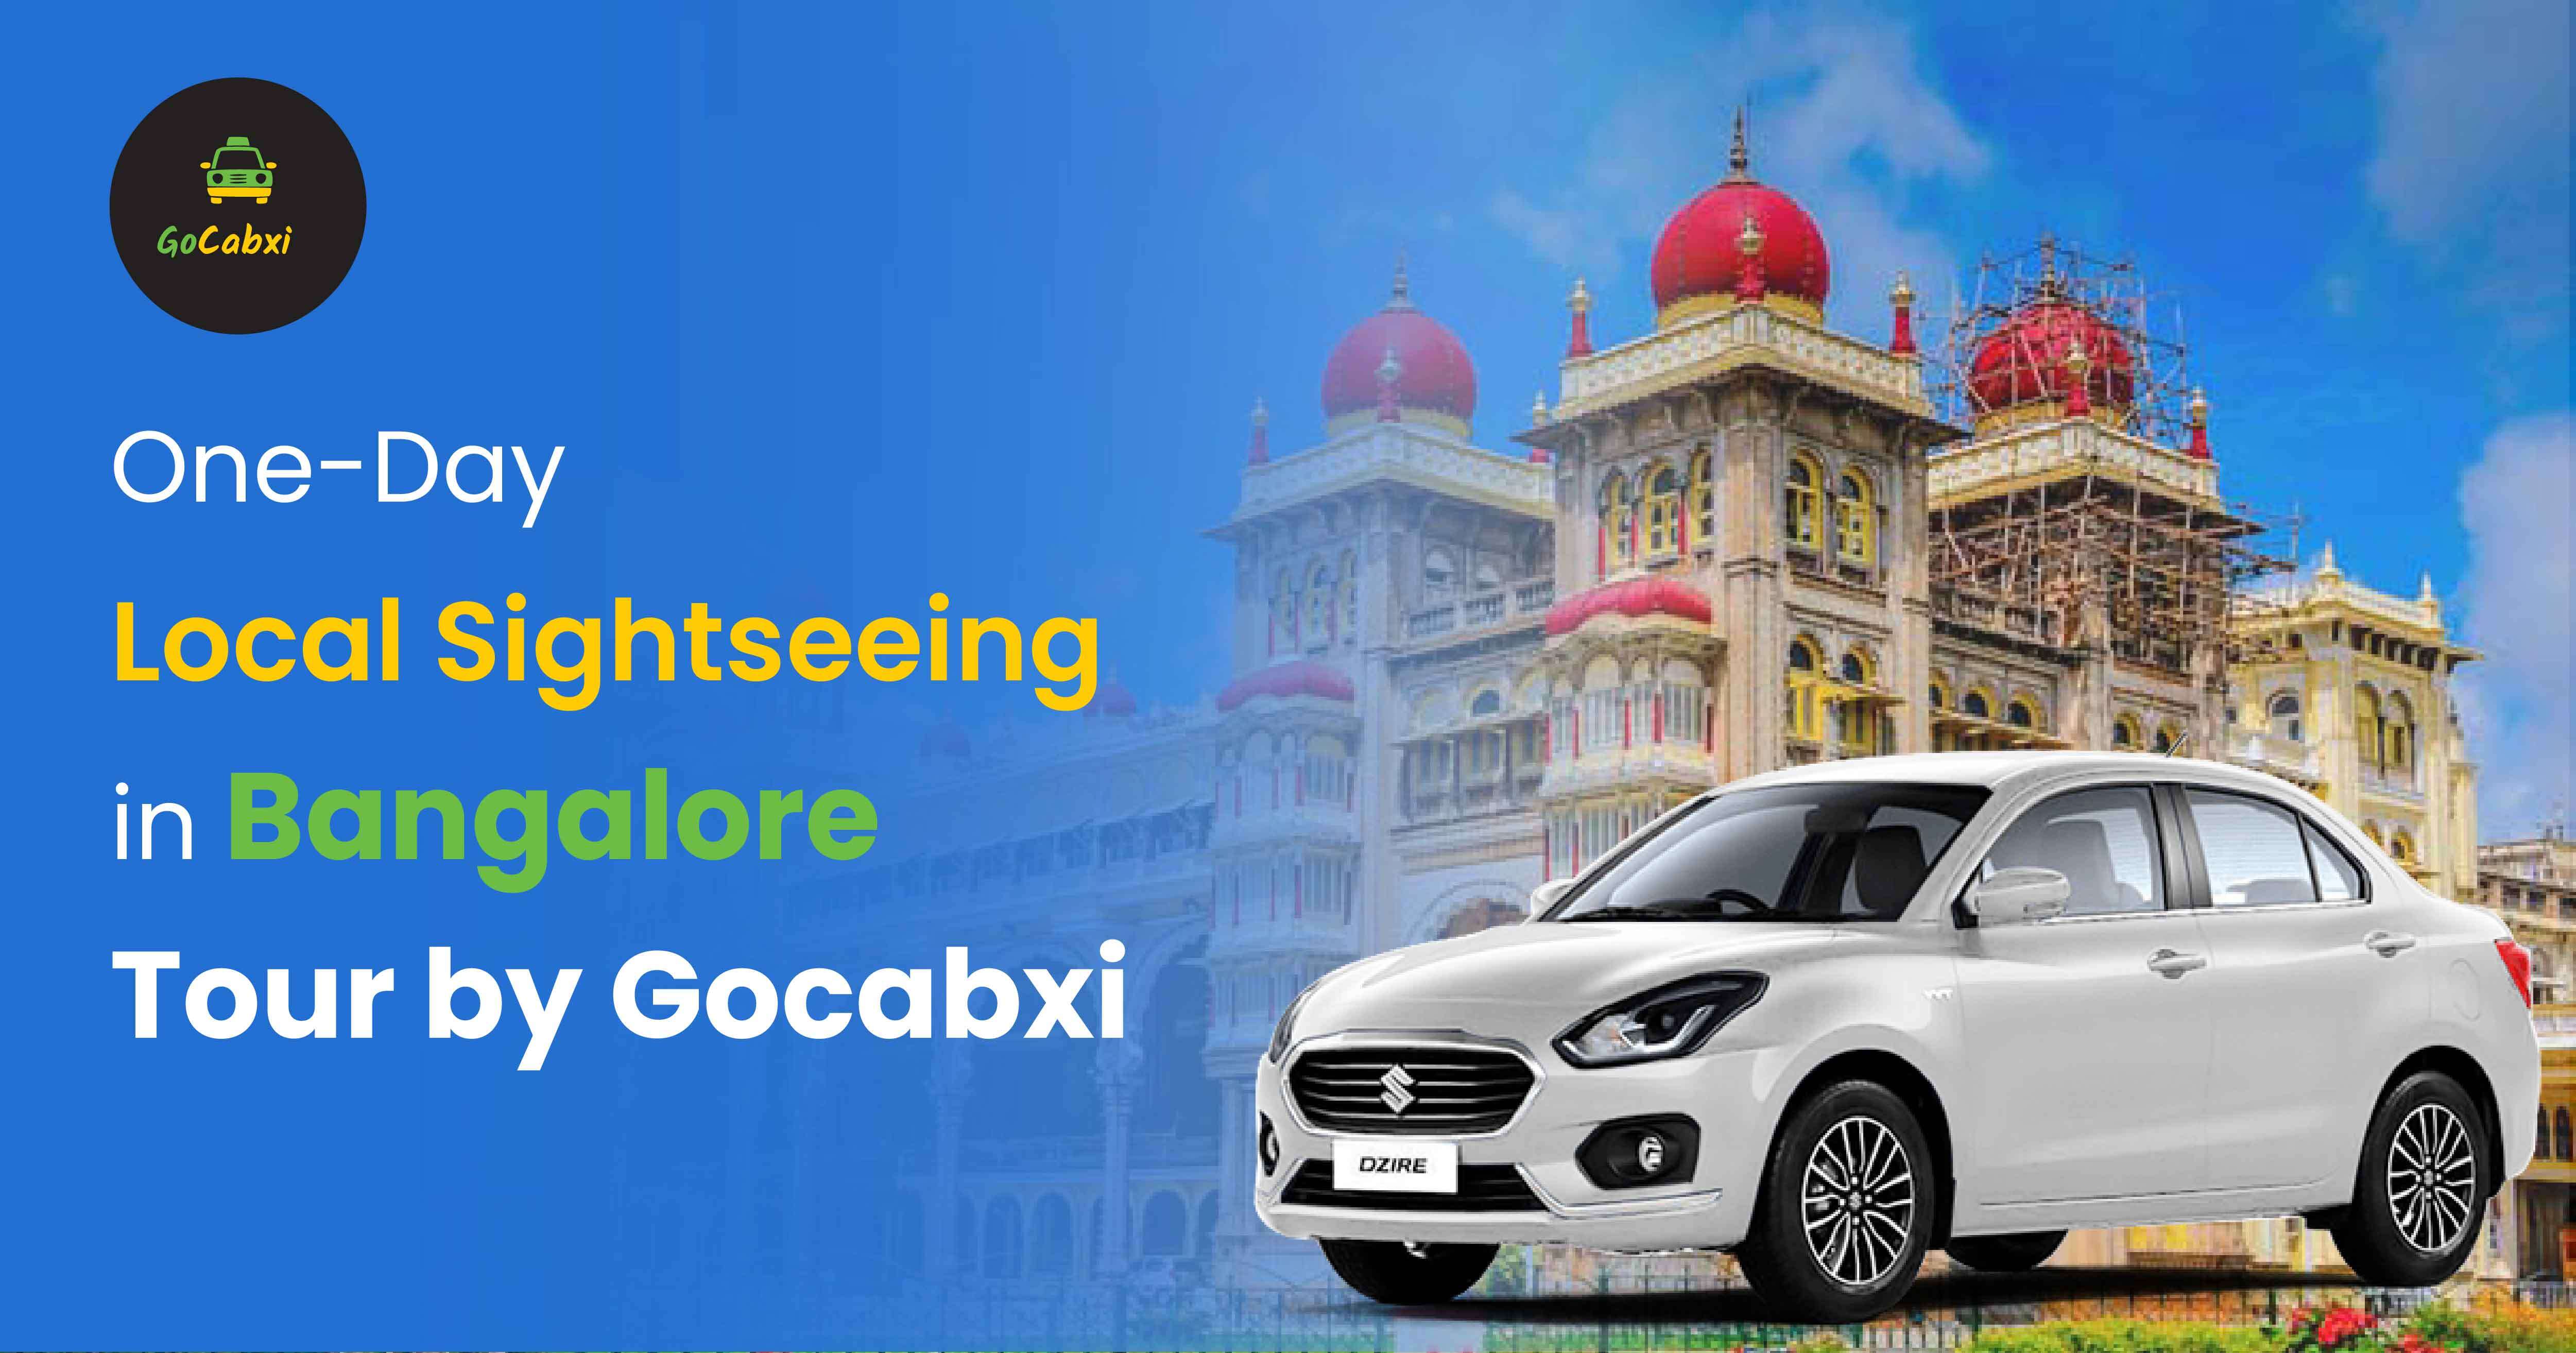 One-Day Local Sightseeing in Bangalore Tour by Gocabxi